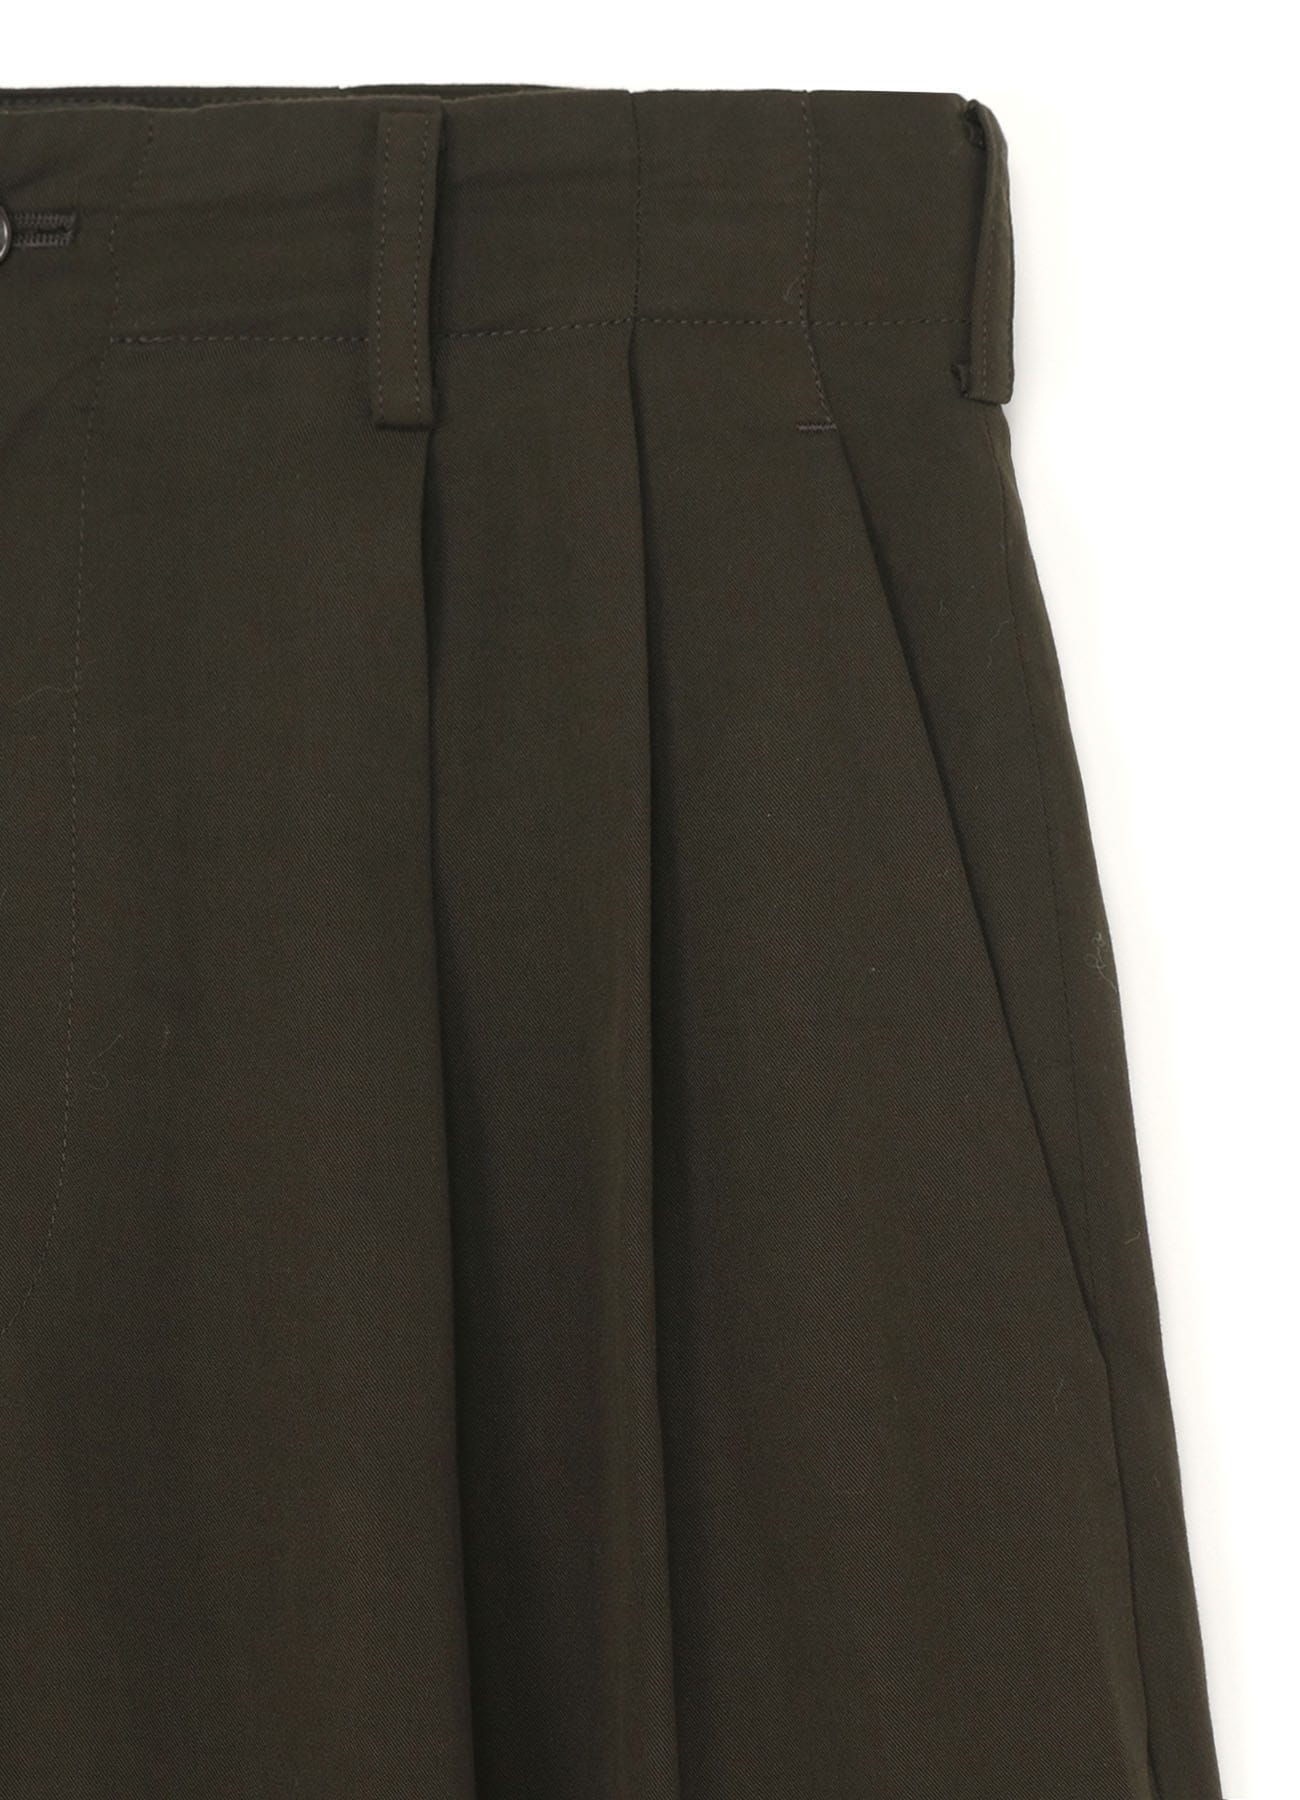 GARMENT-DYED CELLULOSE TWILL DOUBLE PLEATED CUFFED HEM PANTS